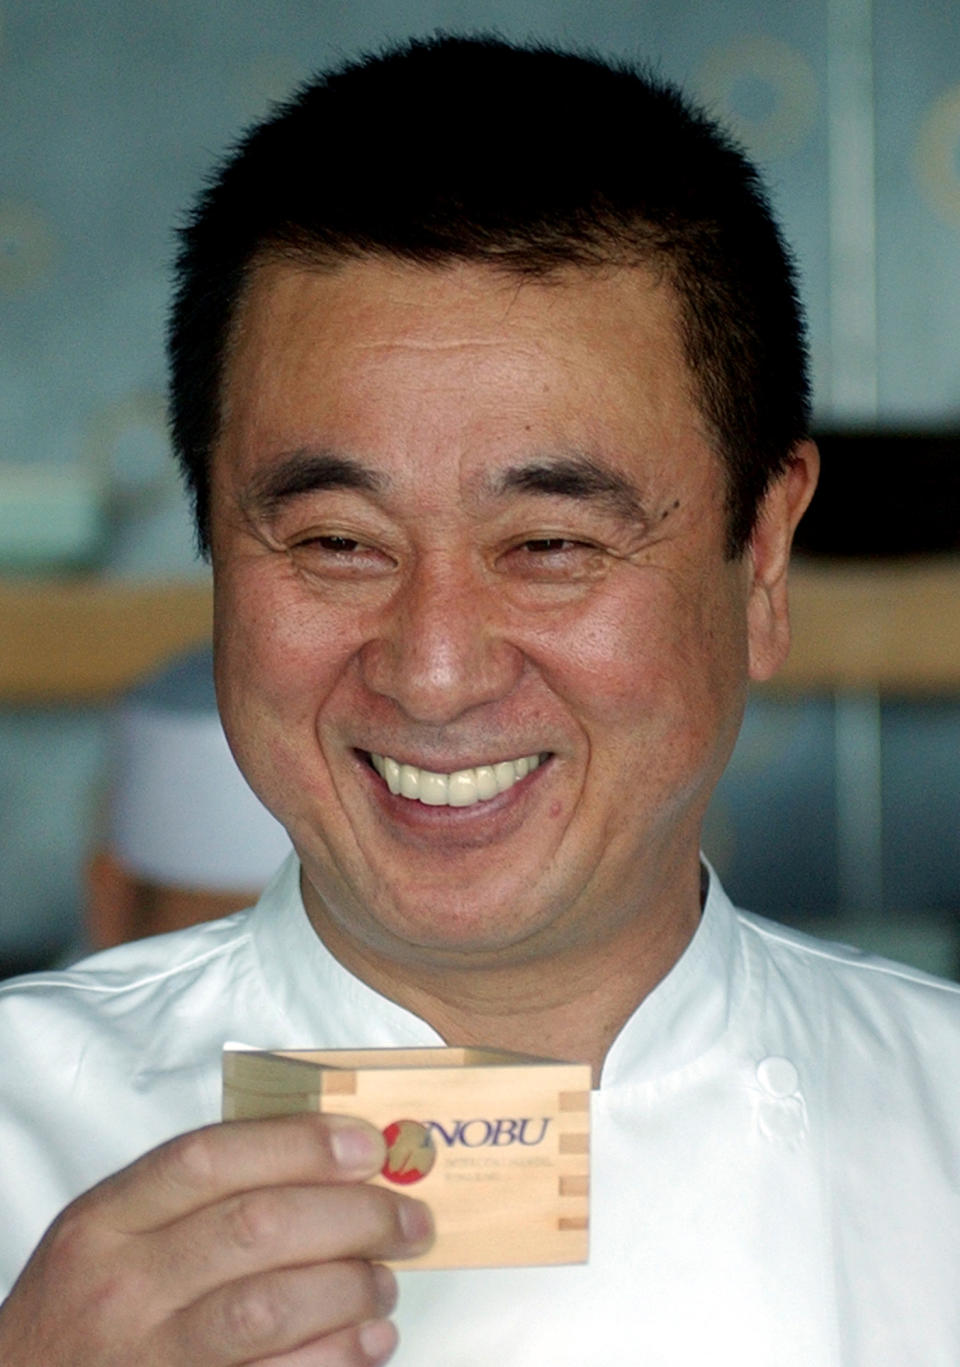 FILE - In this Jan. 10, 2007 file photo, celebrity Japanese chef Nobuyuki Matsuhisa smiles as he proposes a toast for his new restaurant Nobu, at a press availability in Hong Kong. Matsuhisa will be honored Saturday, Feb. 23, 2013, at the South Beach Wine and Food Festival for his fusion cuisine that blends Japanese and South American ingredients. (AP Photo/Lo Sai-hung, File)